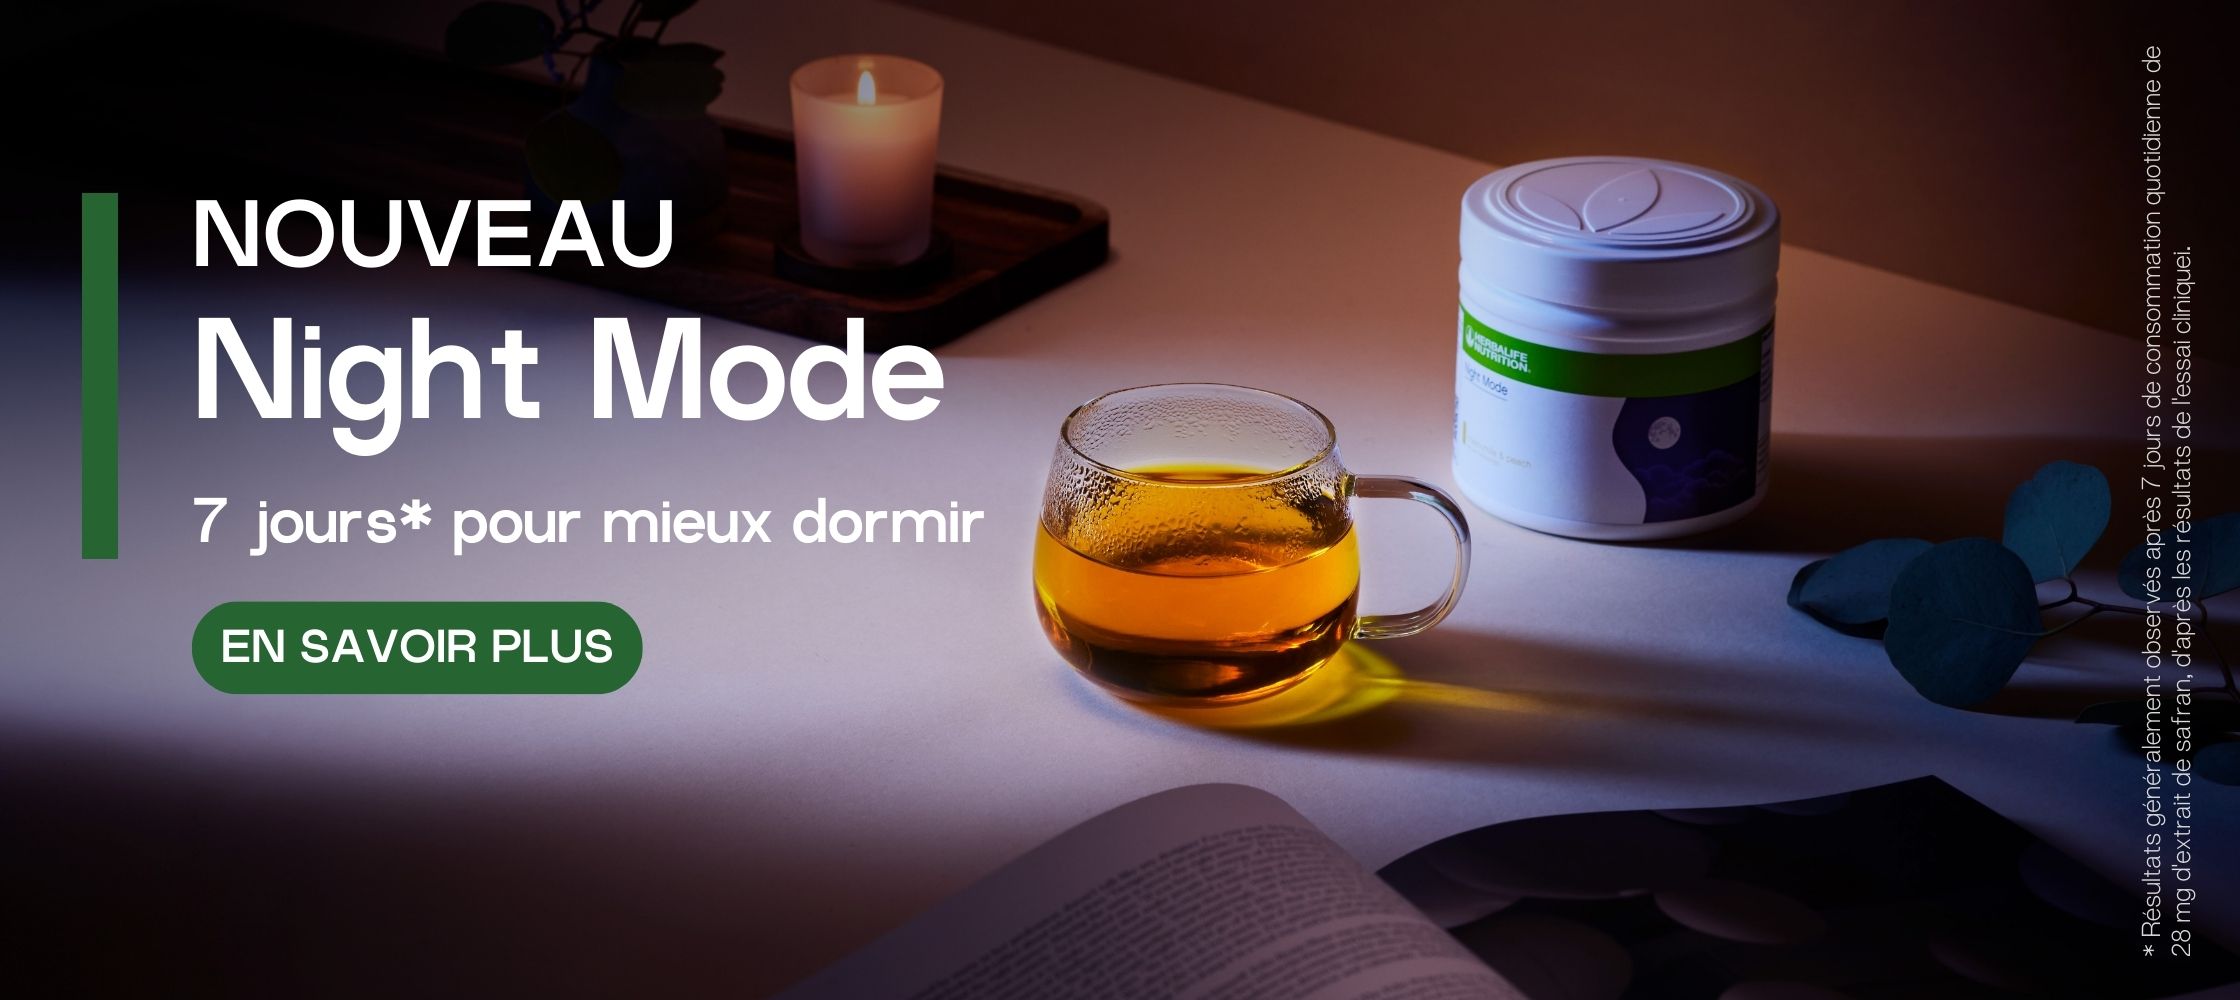 Night Mode saveur camomille & pêche |